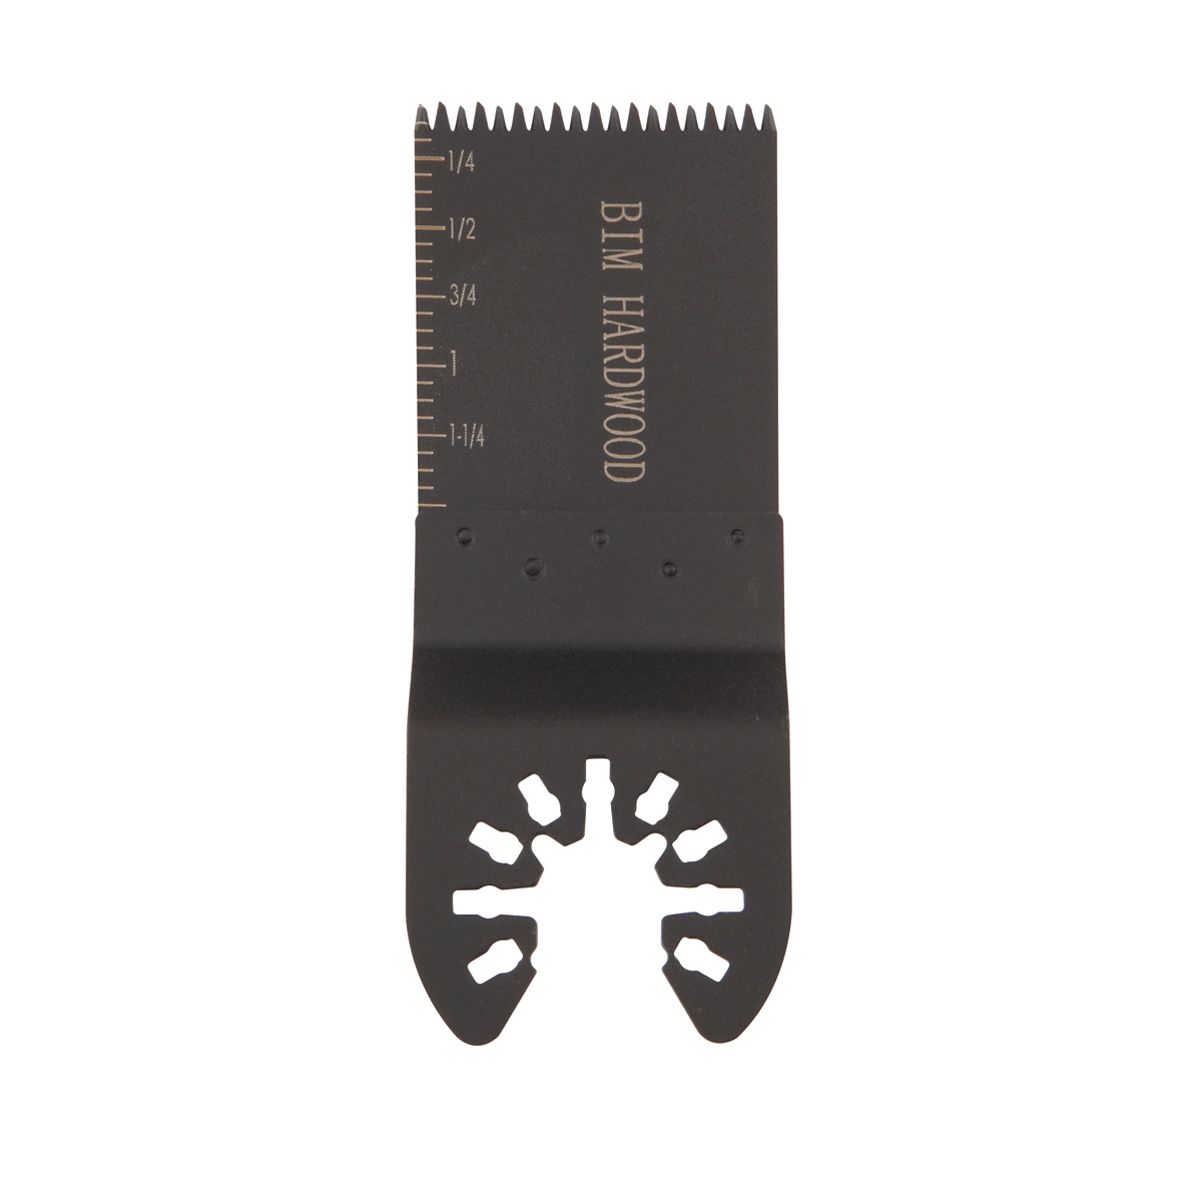 WARRIOR 1-3/8 in.  Precision Ground Tooth Plunge/Flush Cutting Blade for Oscillating Multi-Tools